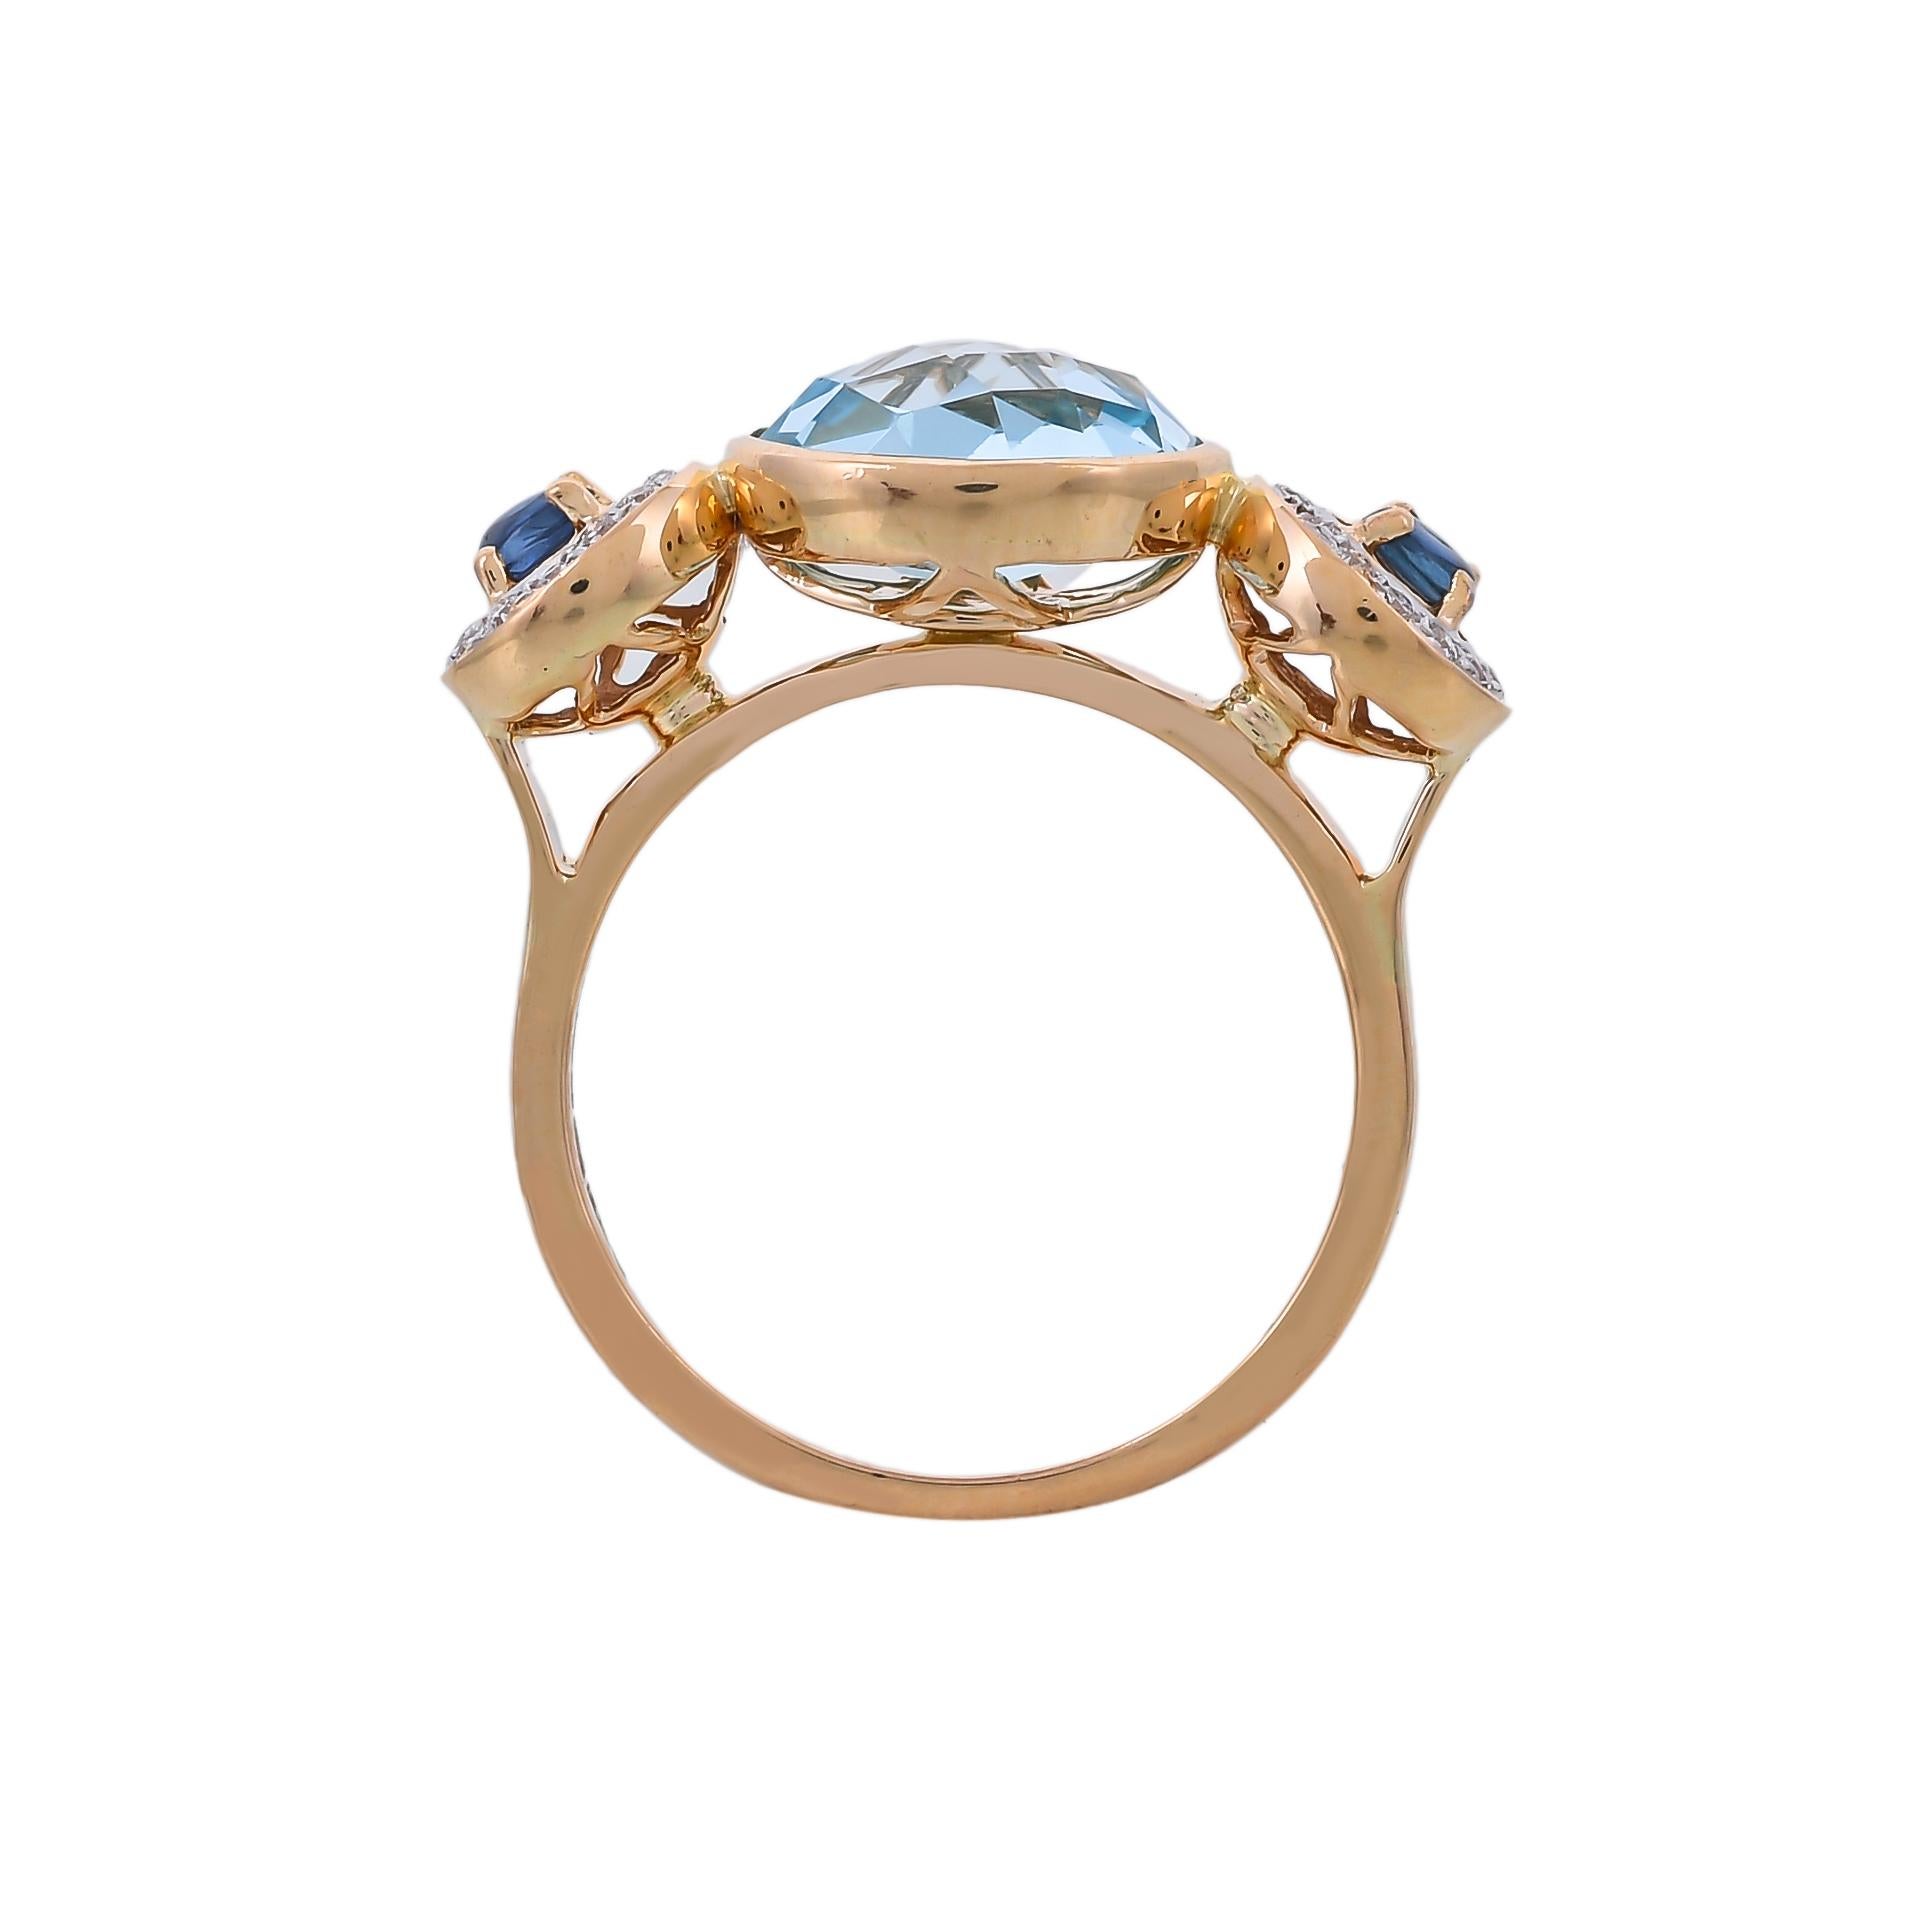 Mounted in 18 karats yellow gold, this simple and elegant ring is from the collection 'Bonbon'. This ring revolves around simplistic designs concept with just accents of 0.16 carats diamonds, 0.29 carats blue sapphire and 4.36 carats blue topaz.